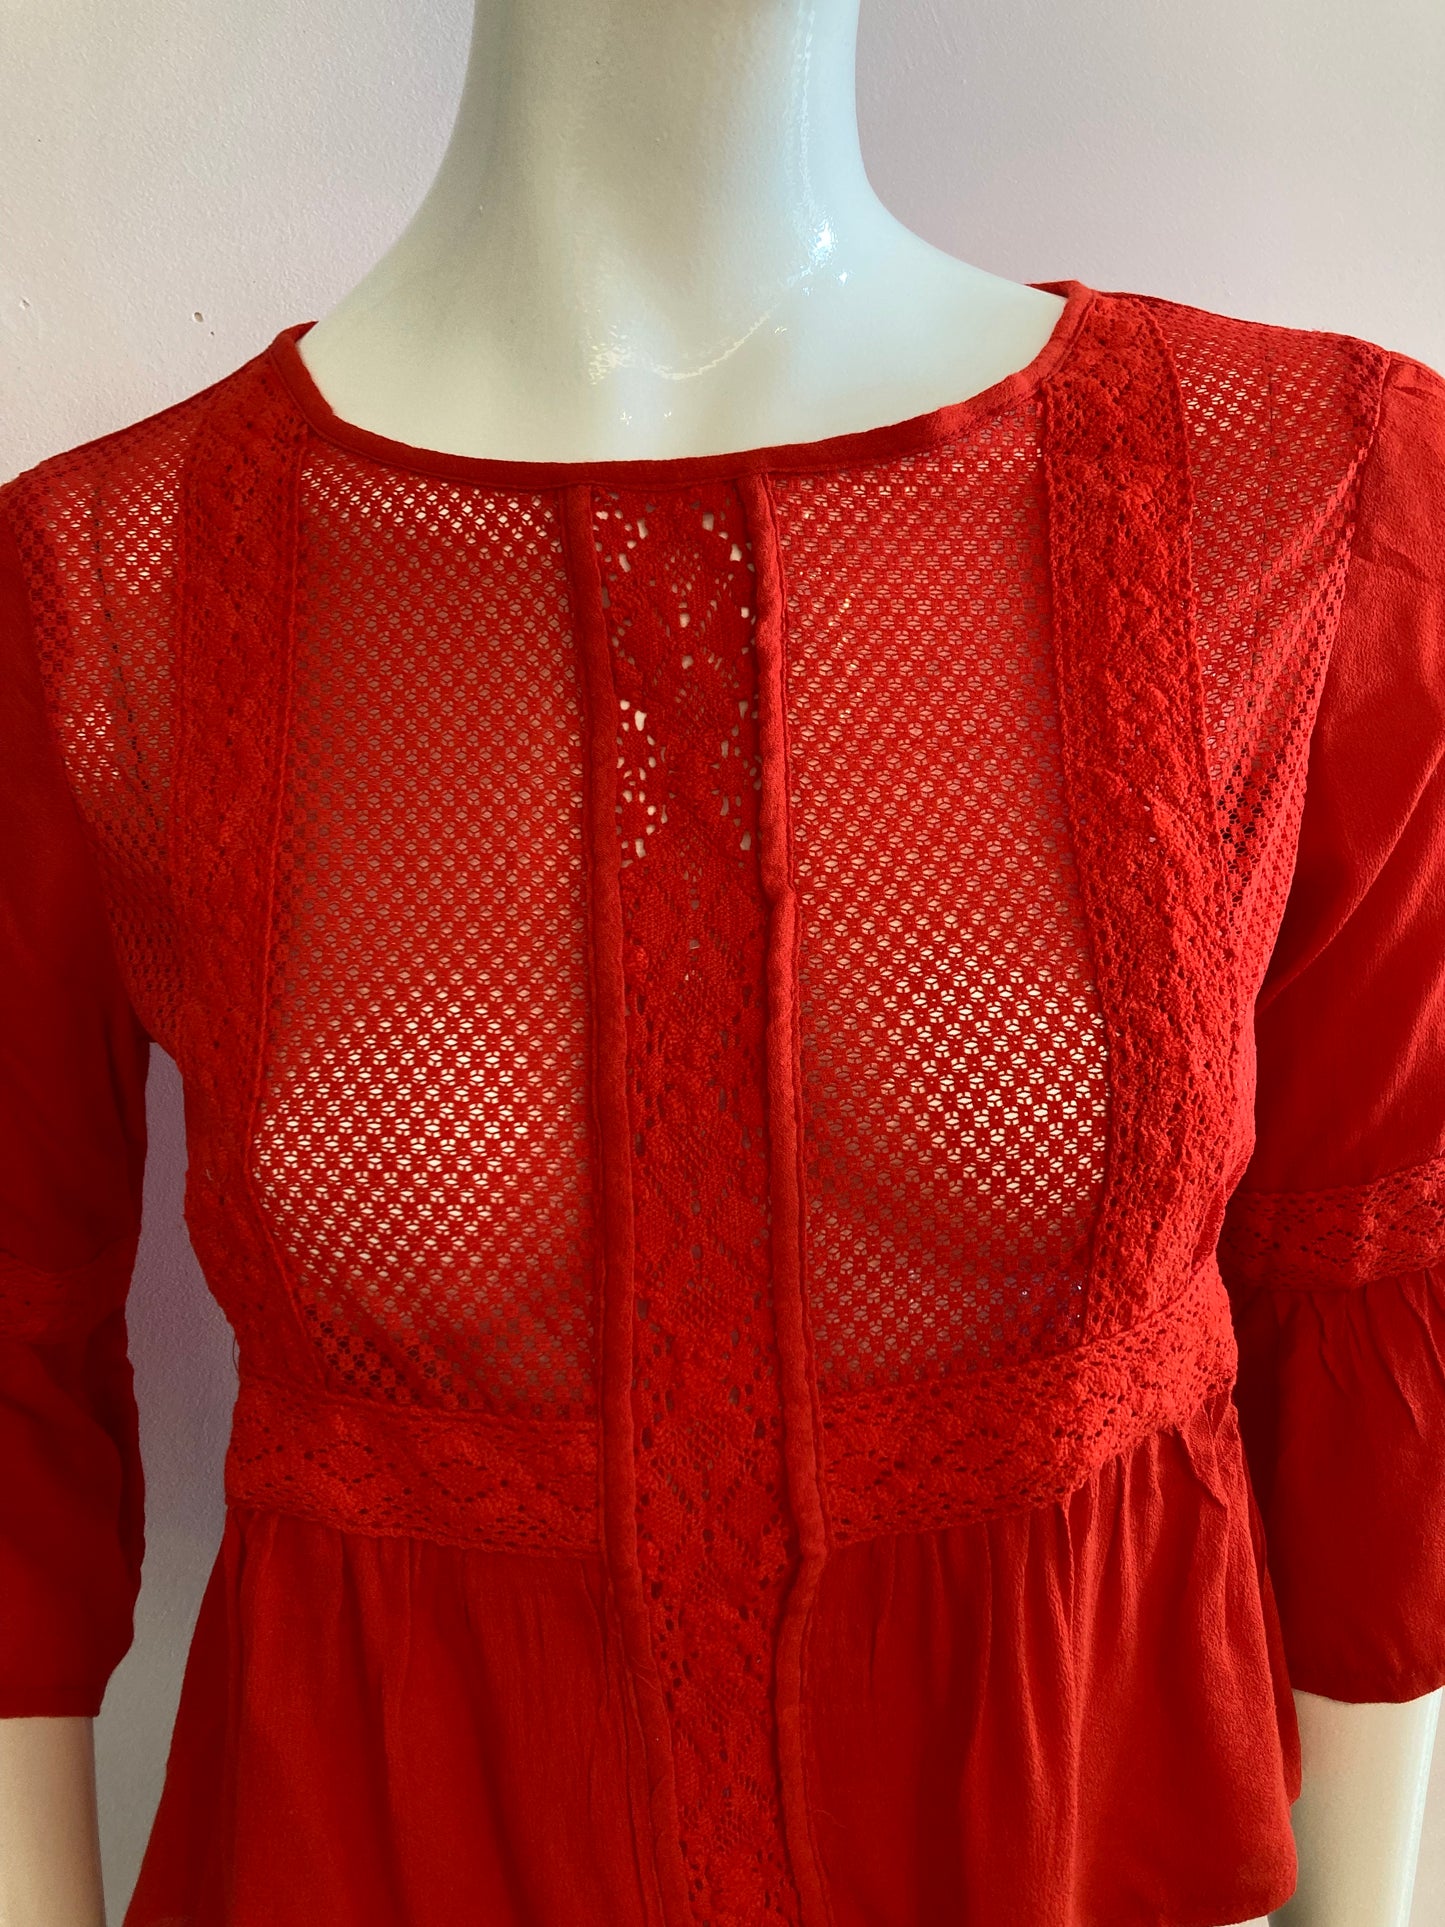 Red blouse with lace on the front and ruffles.